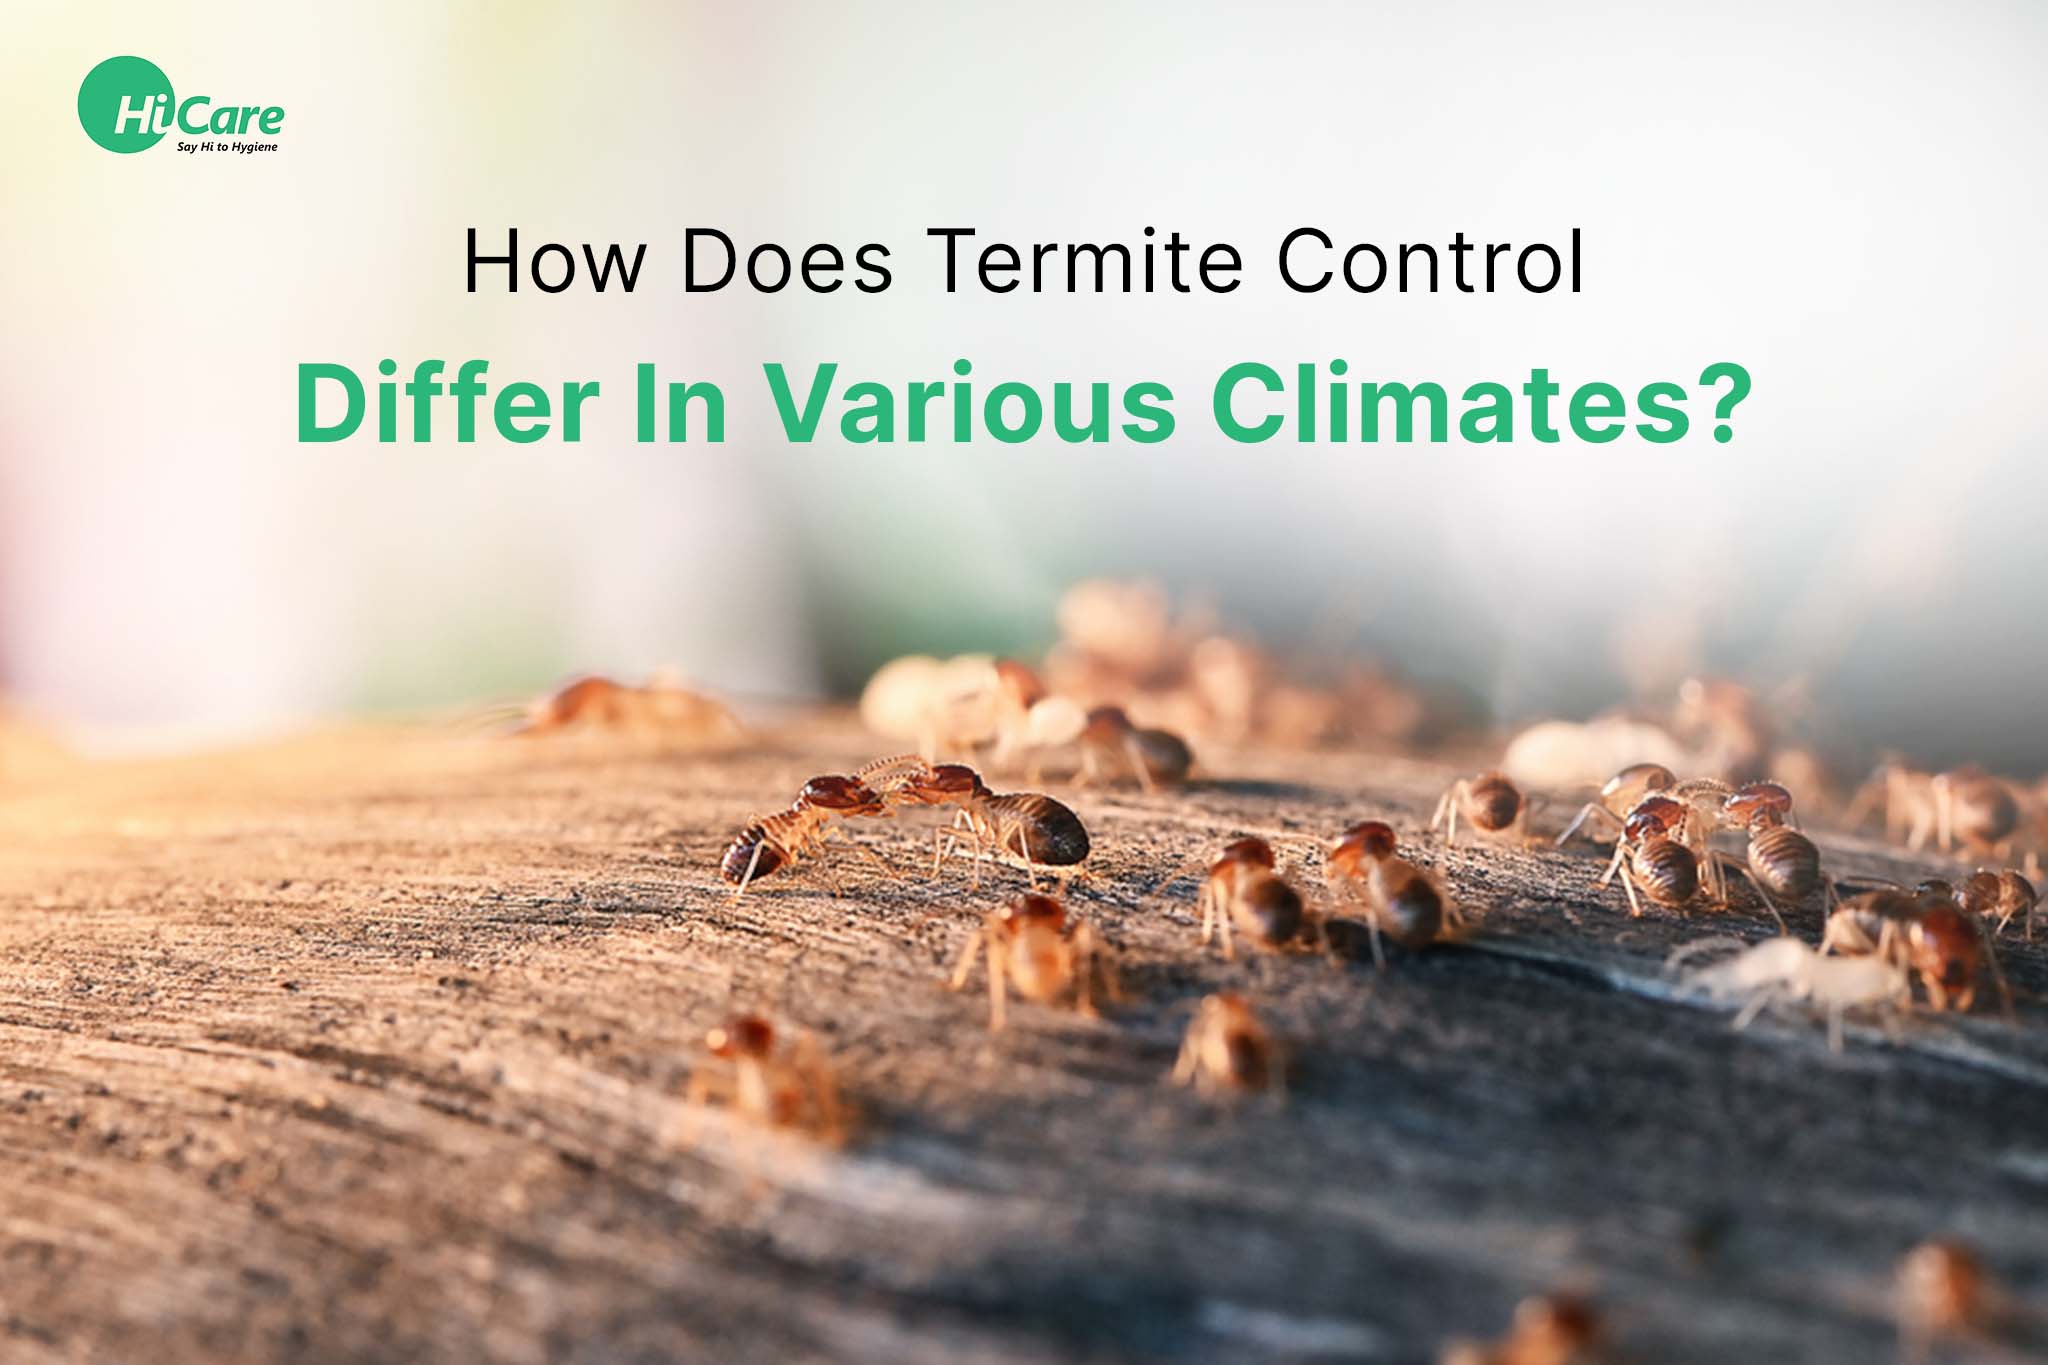 How Does Termite Control Differ In Various Climates?